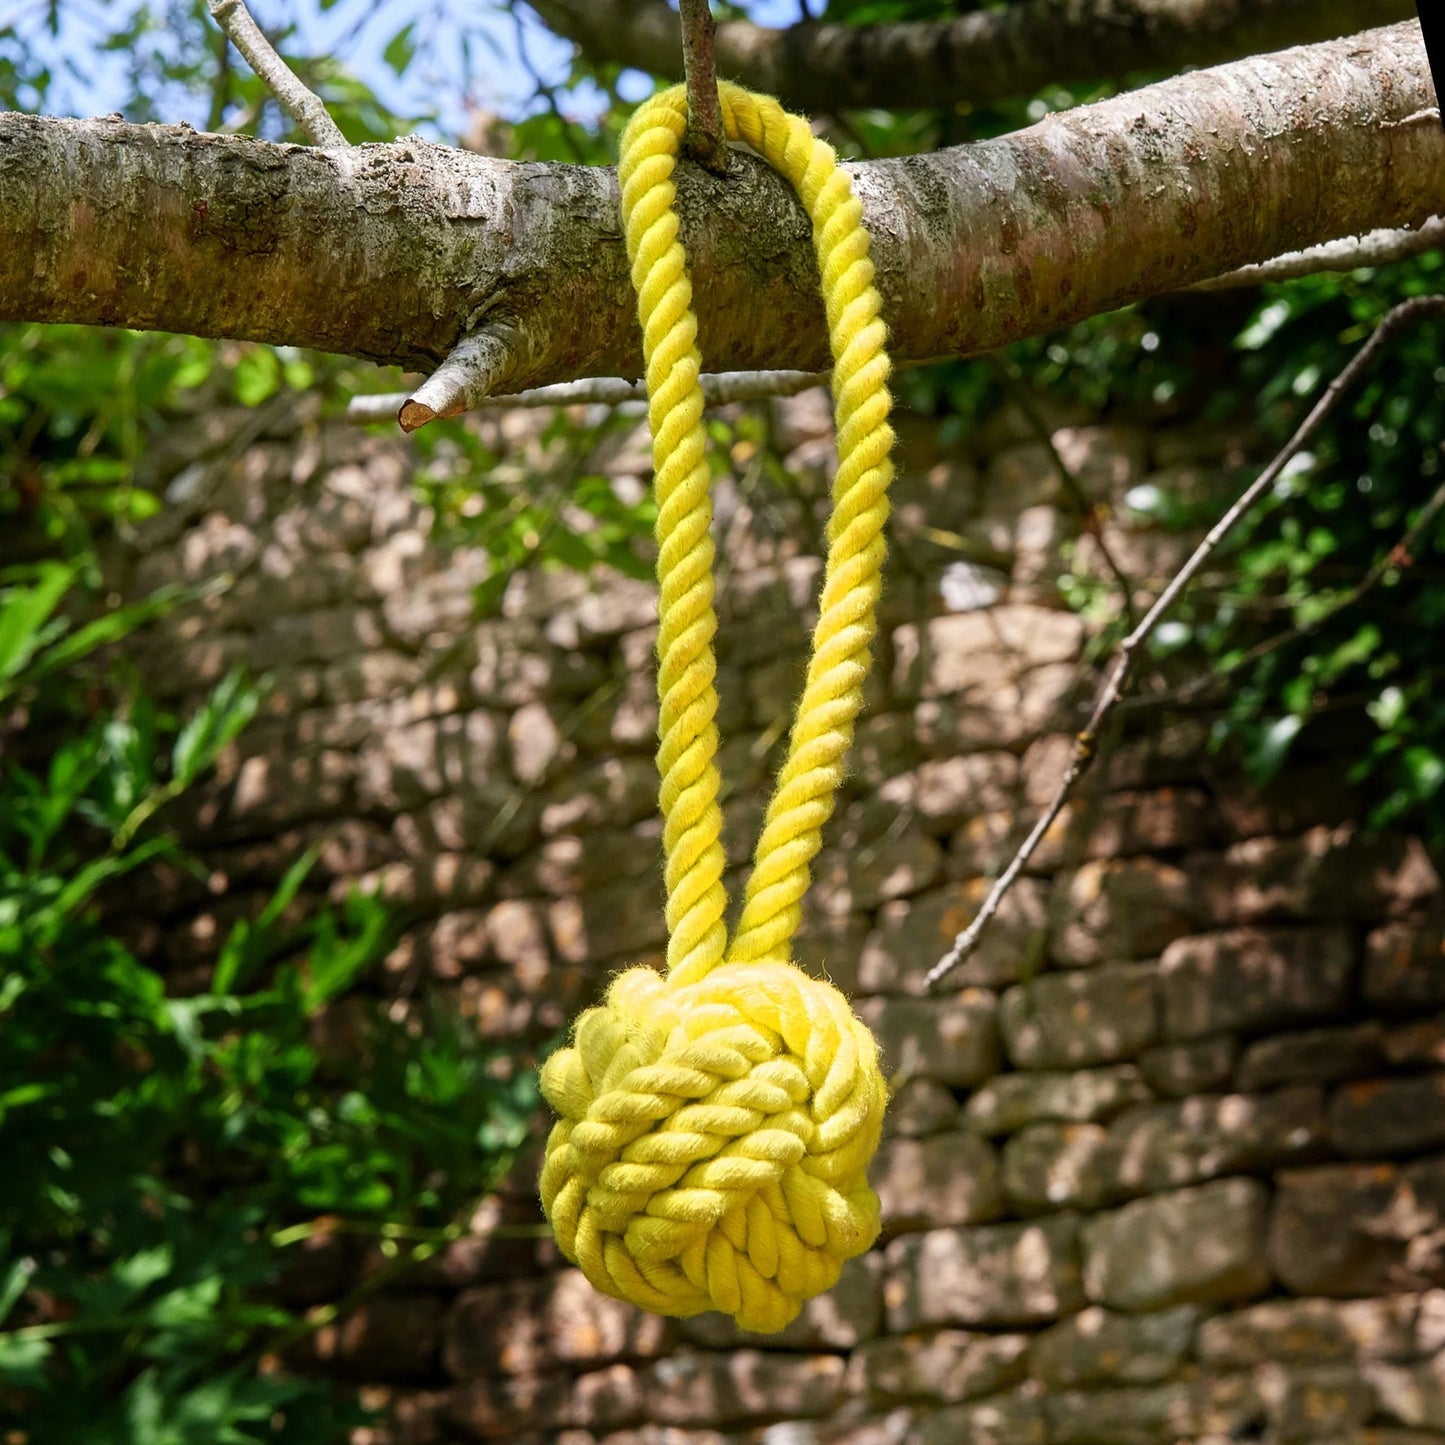 Rope Ball - Eco Toy - The Hungry Hound Co. -